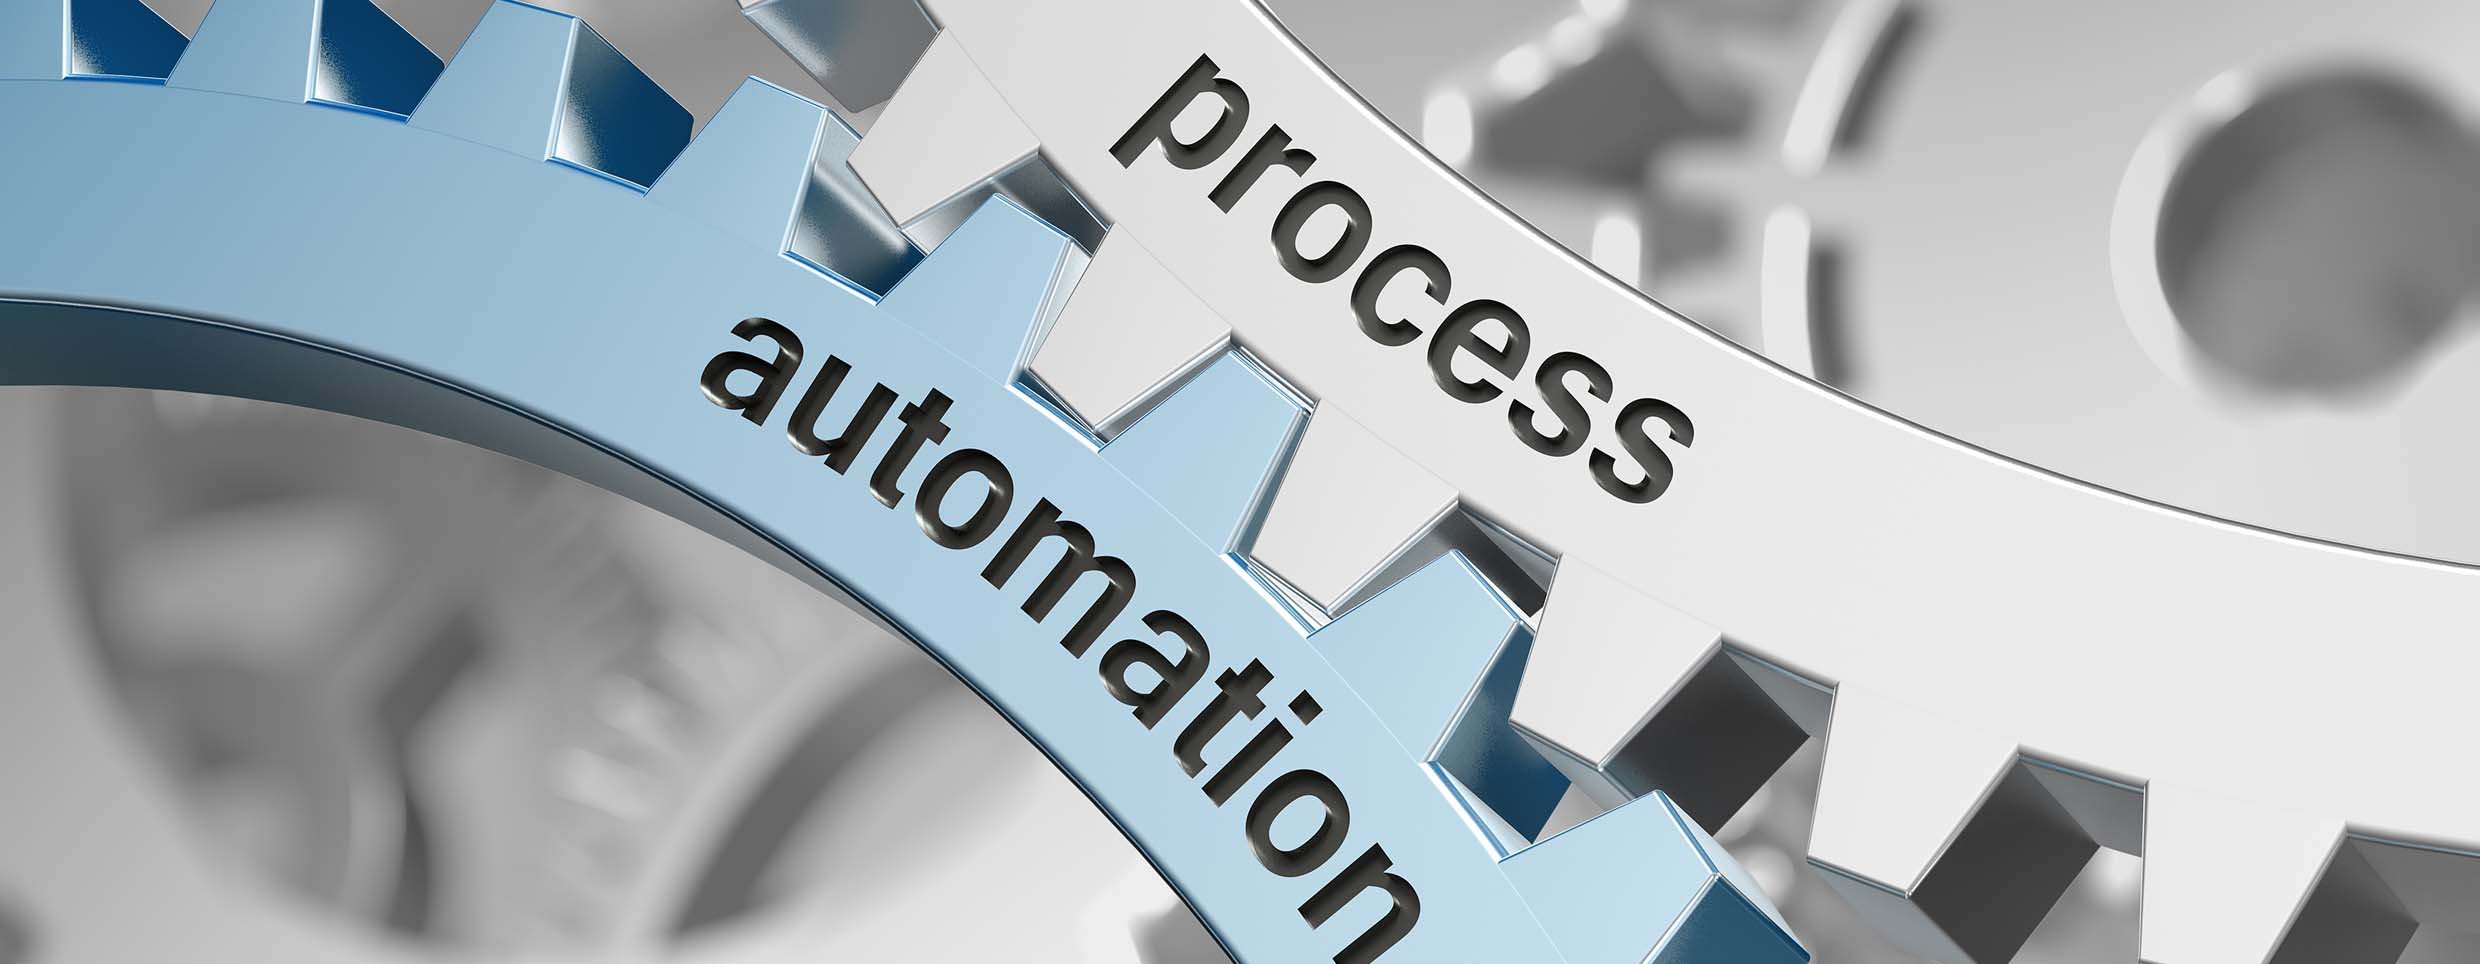 runbook automation process automation